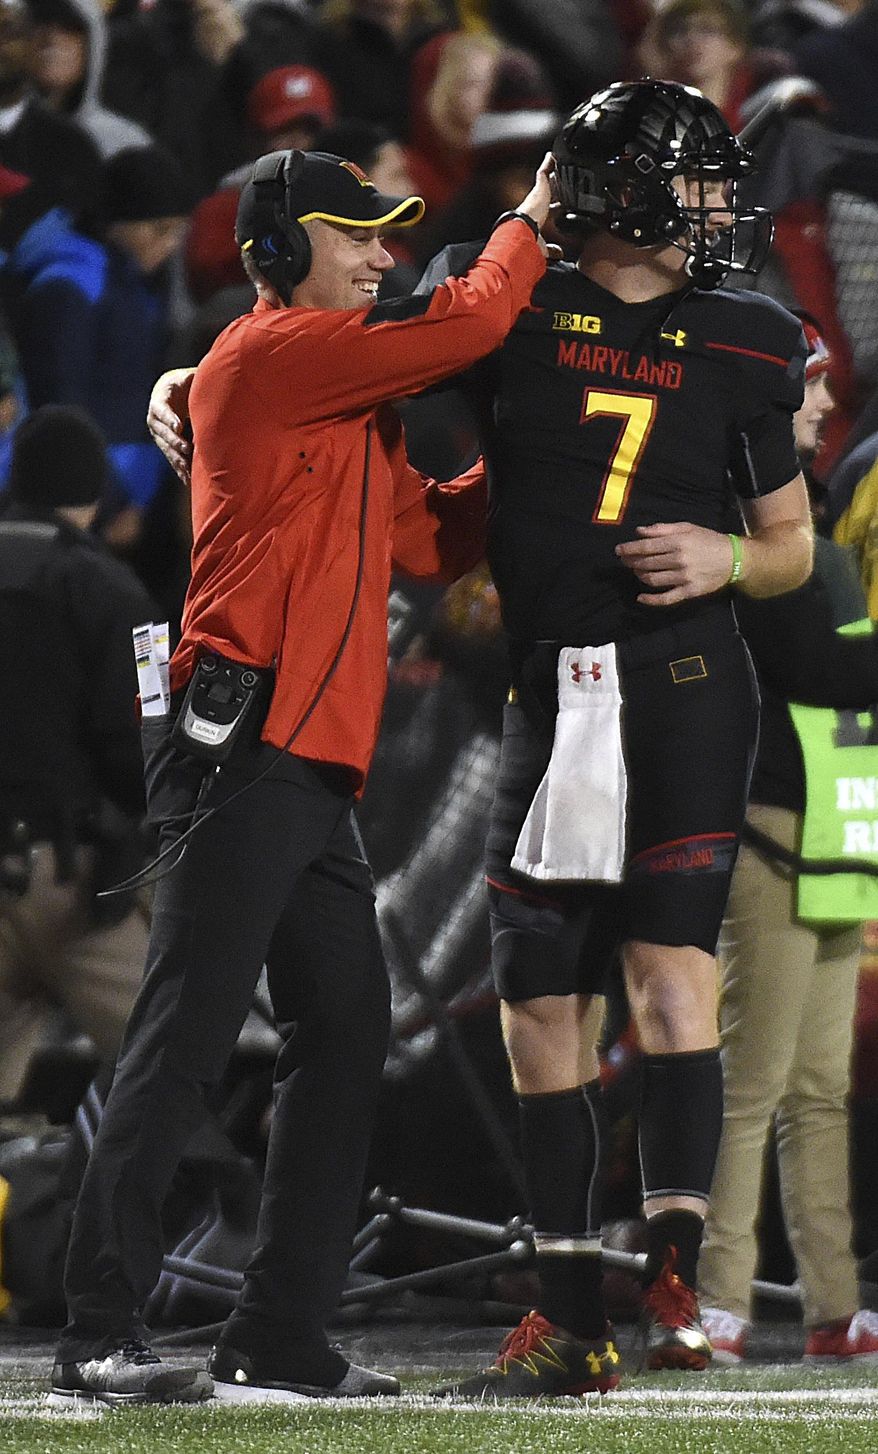 Maryland head coach DJ Durkin and quarterback Caleb Rowe celebrate a touchdown against Michigan State in the first half of an NCAA college football game, Saturday, Oct. 22, 2016, in College Park, Md. (AP Photo/Gail Burton)